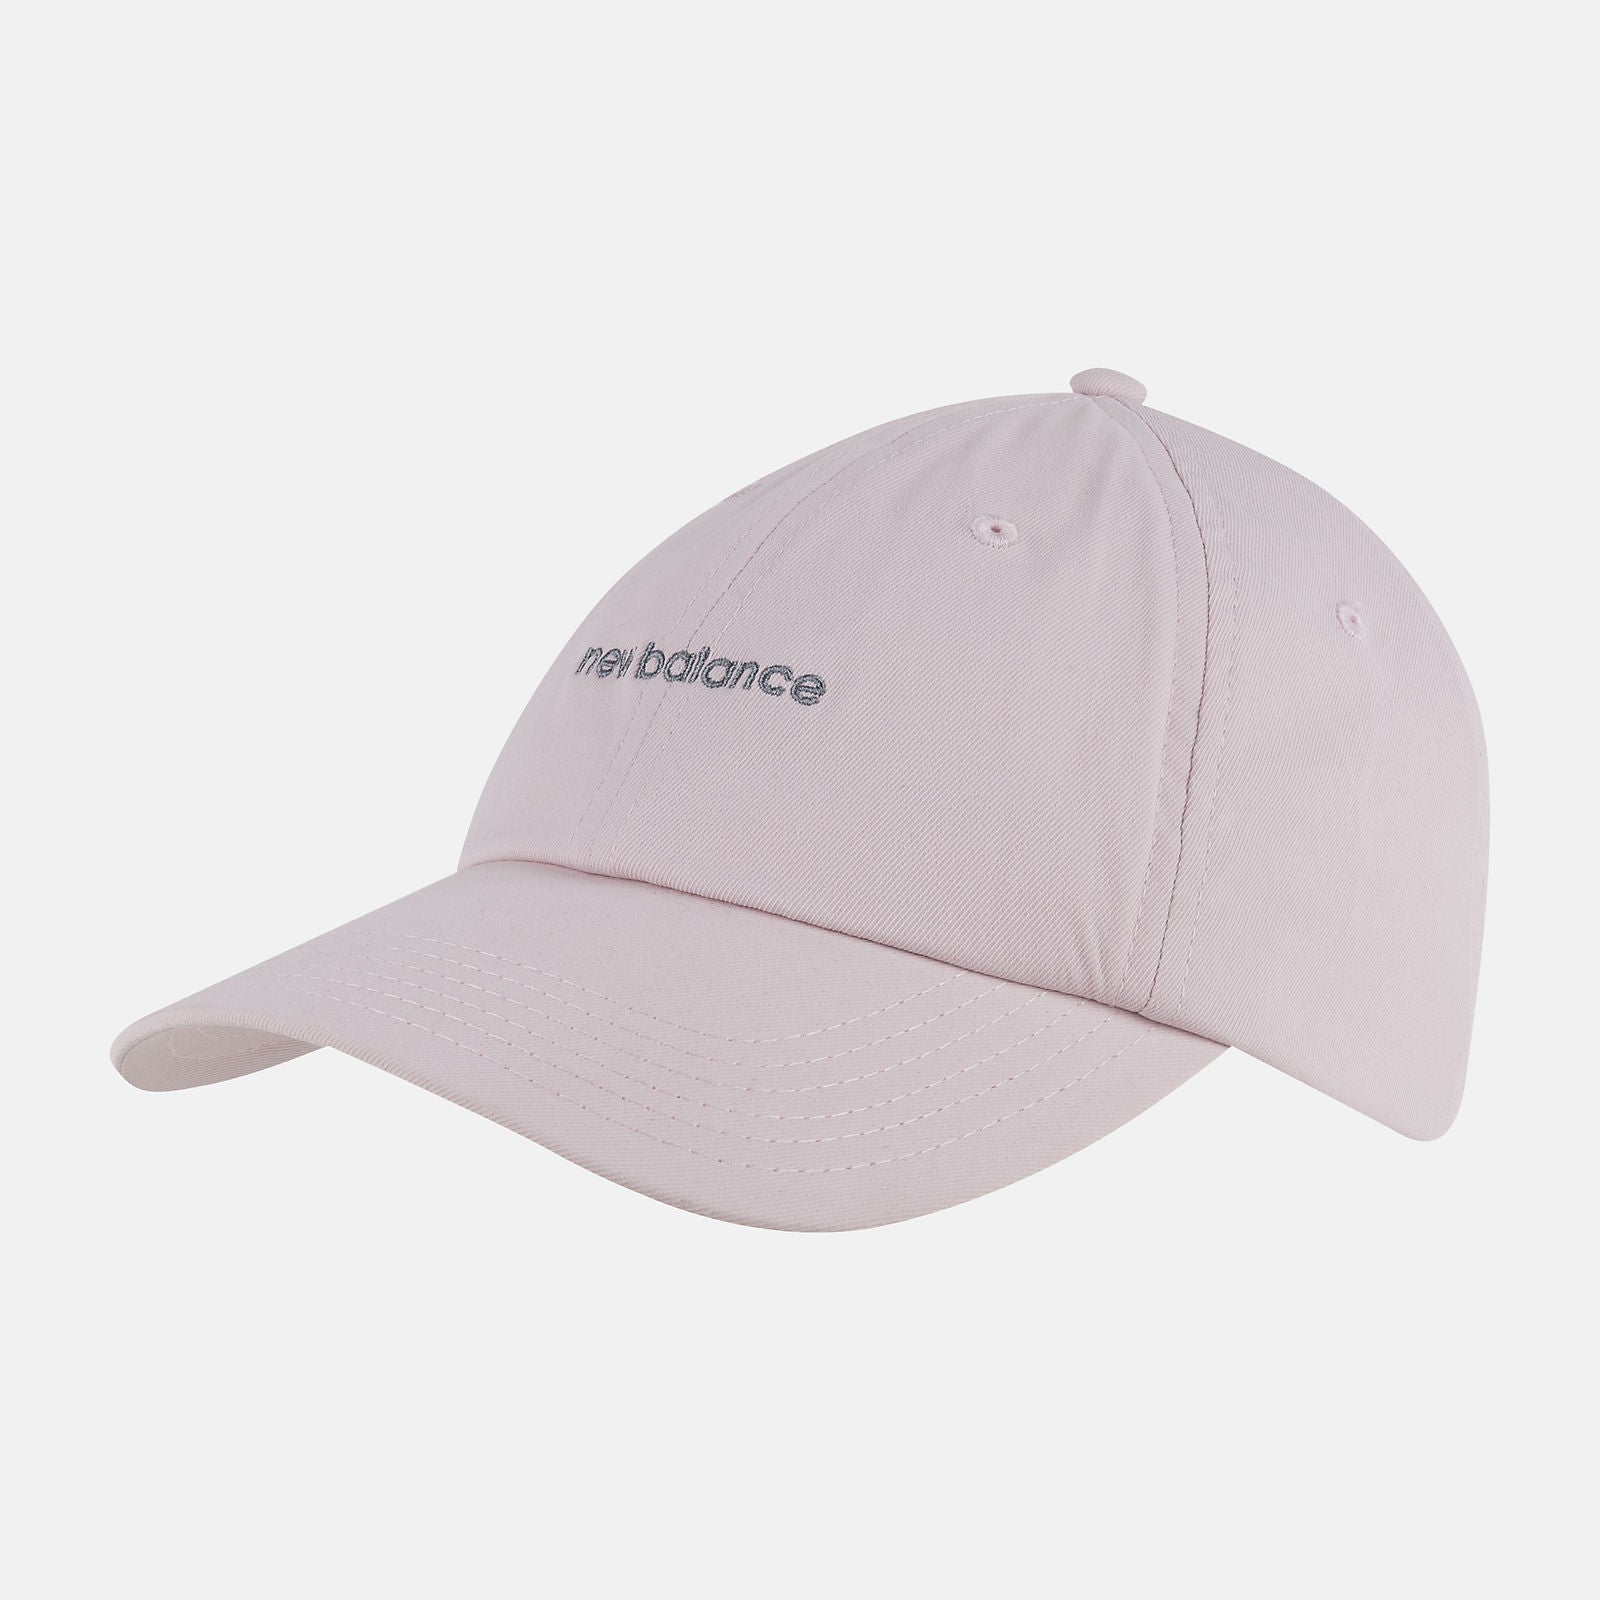 NEW BALANCE NB Linear Logo Hat in Stone Pink LAH21100 O/S STO/SPINK FROM EIGHTYWINGOLD - OFFICIAL BRAND PARTNER